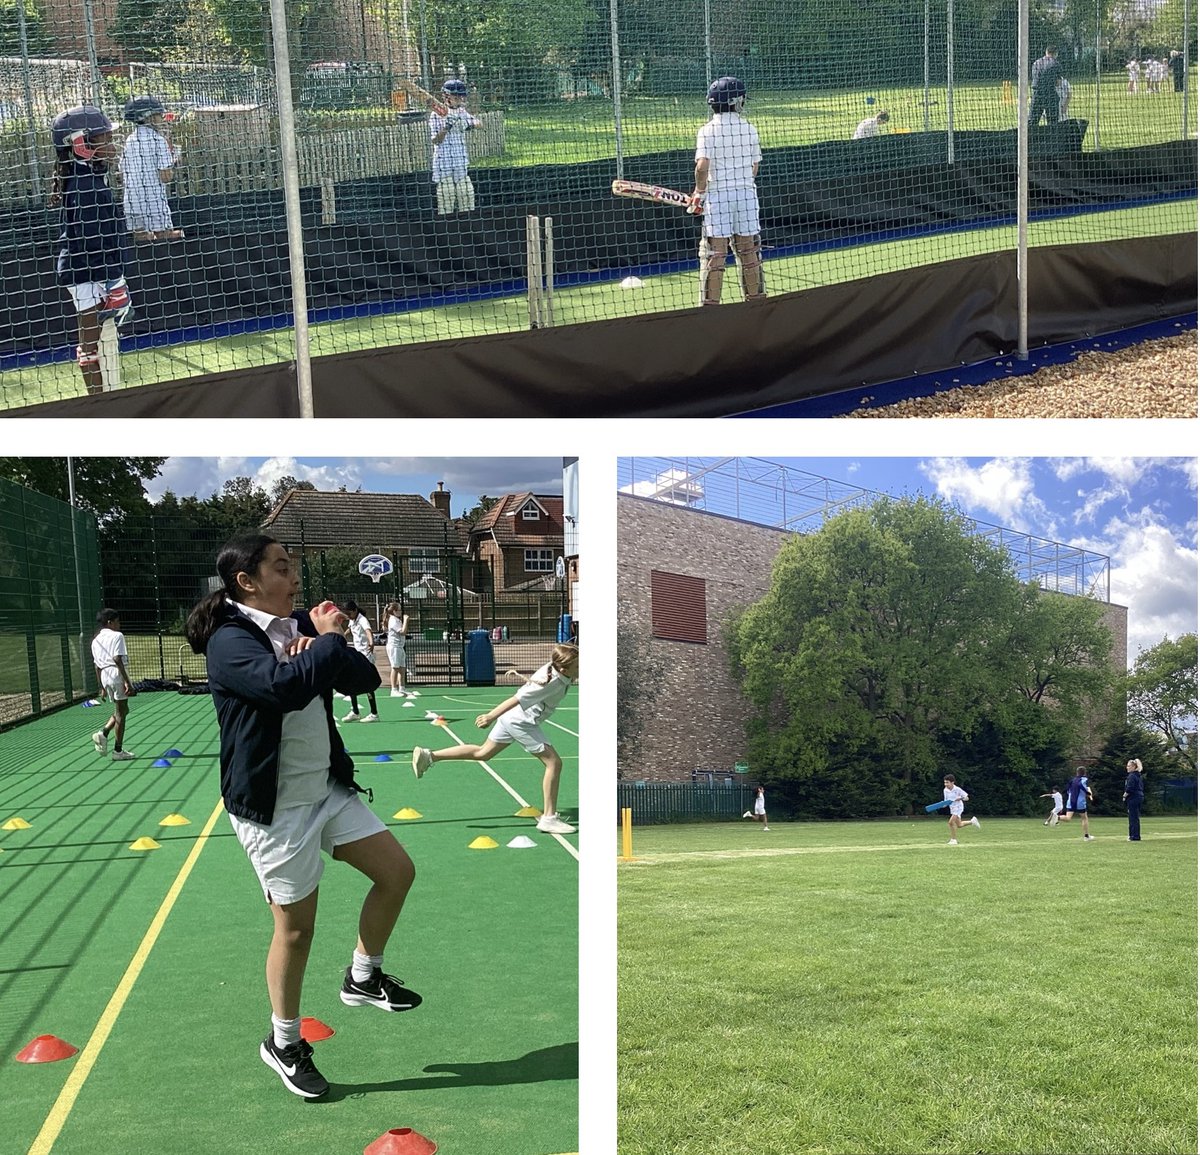 Cricket season is well underway @StainesPrep. Our Year 5’s cannot wait for their first set of matches! #StainesPrepYear5 #ThisGirlCan #BeYourBest